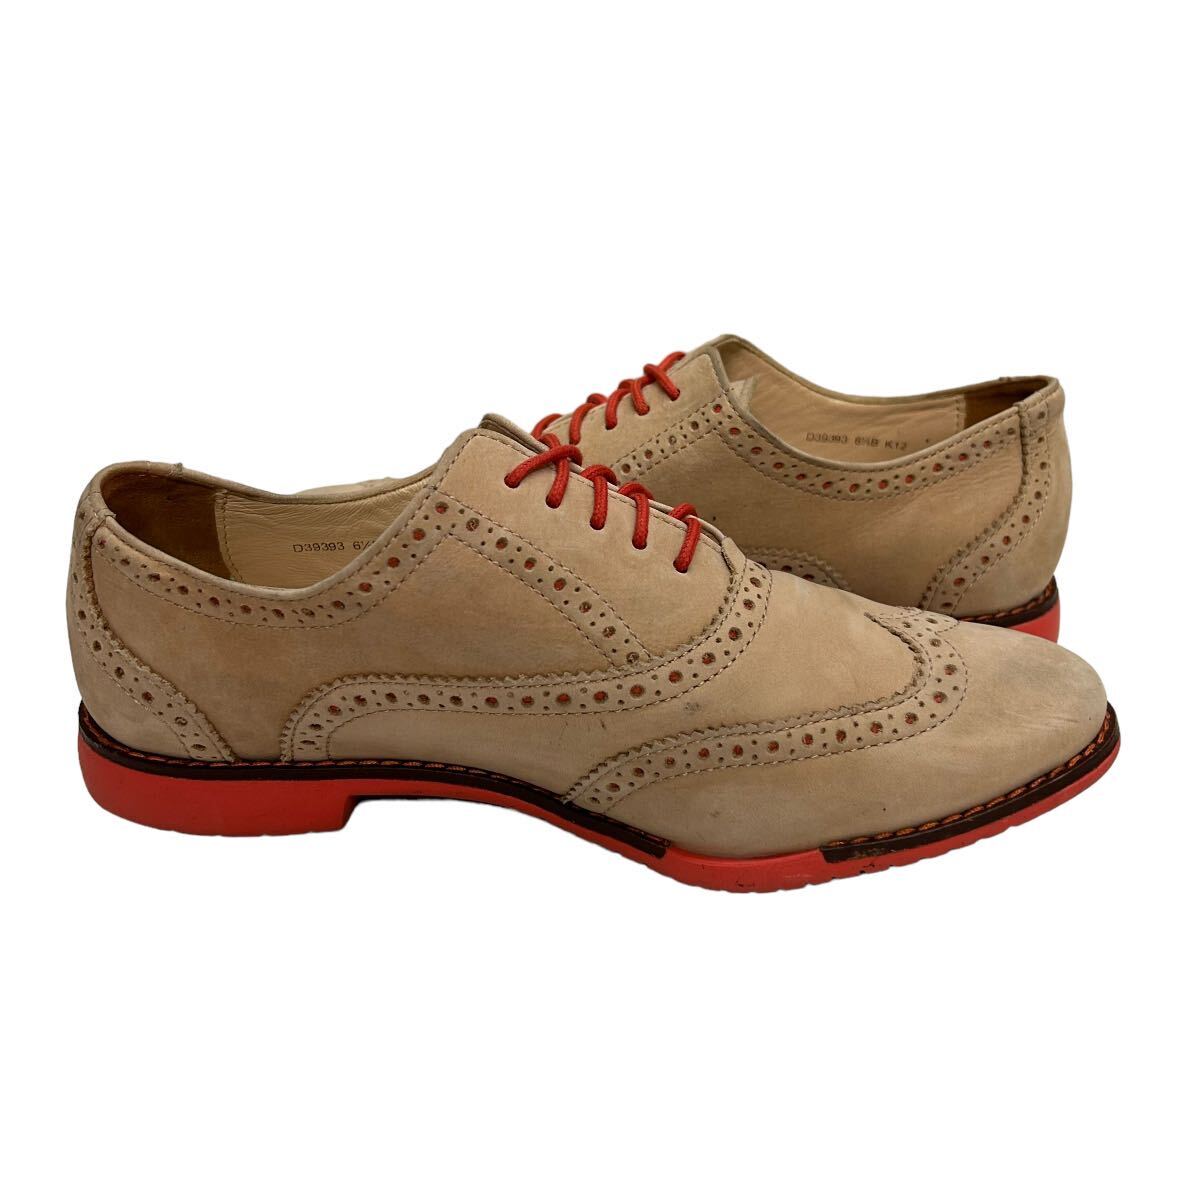 A013 Cole Haan Cole Haan leather walking shoes race up shoes 6.5B approximately 23.5cm beige n back Wing chip 